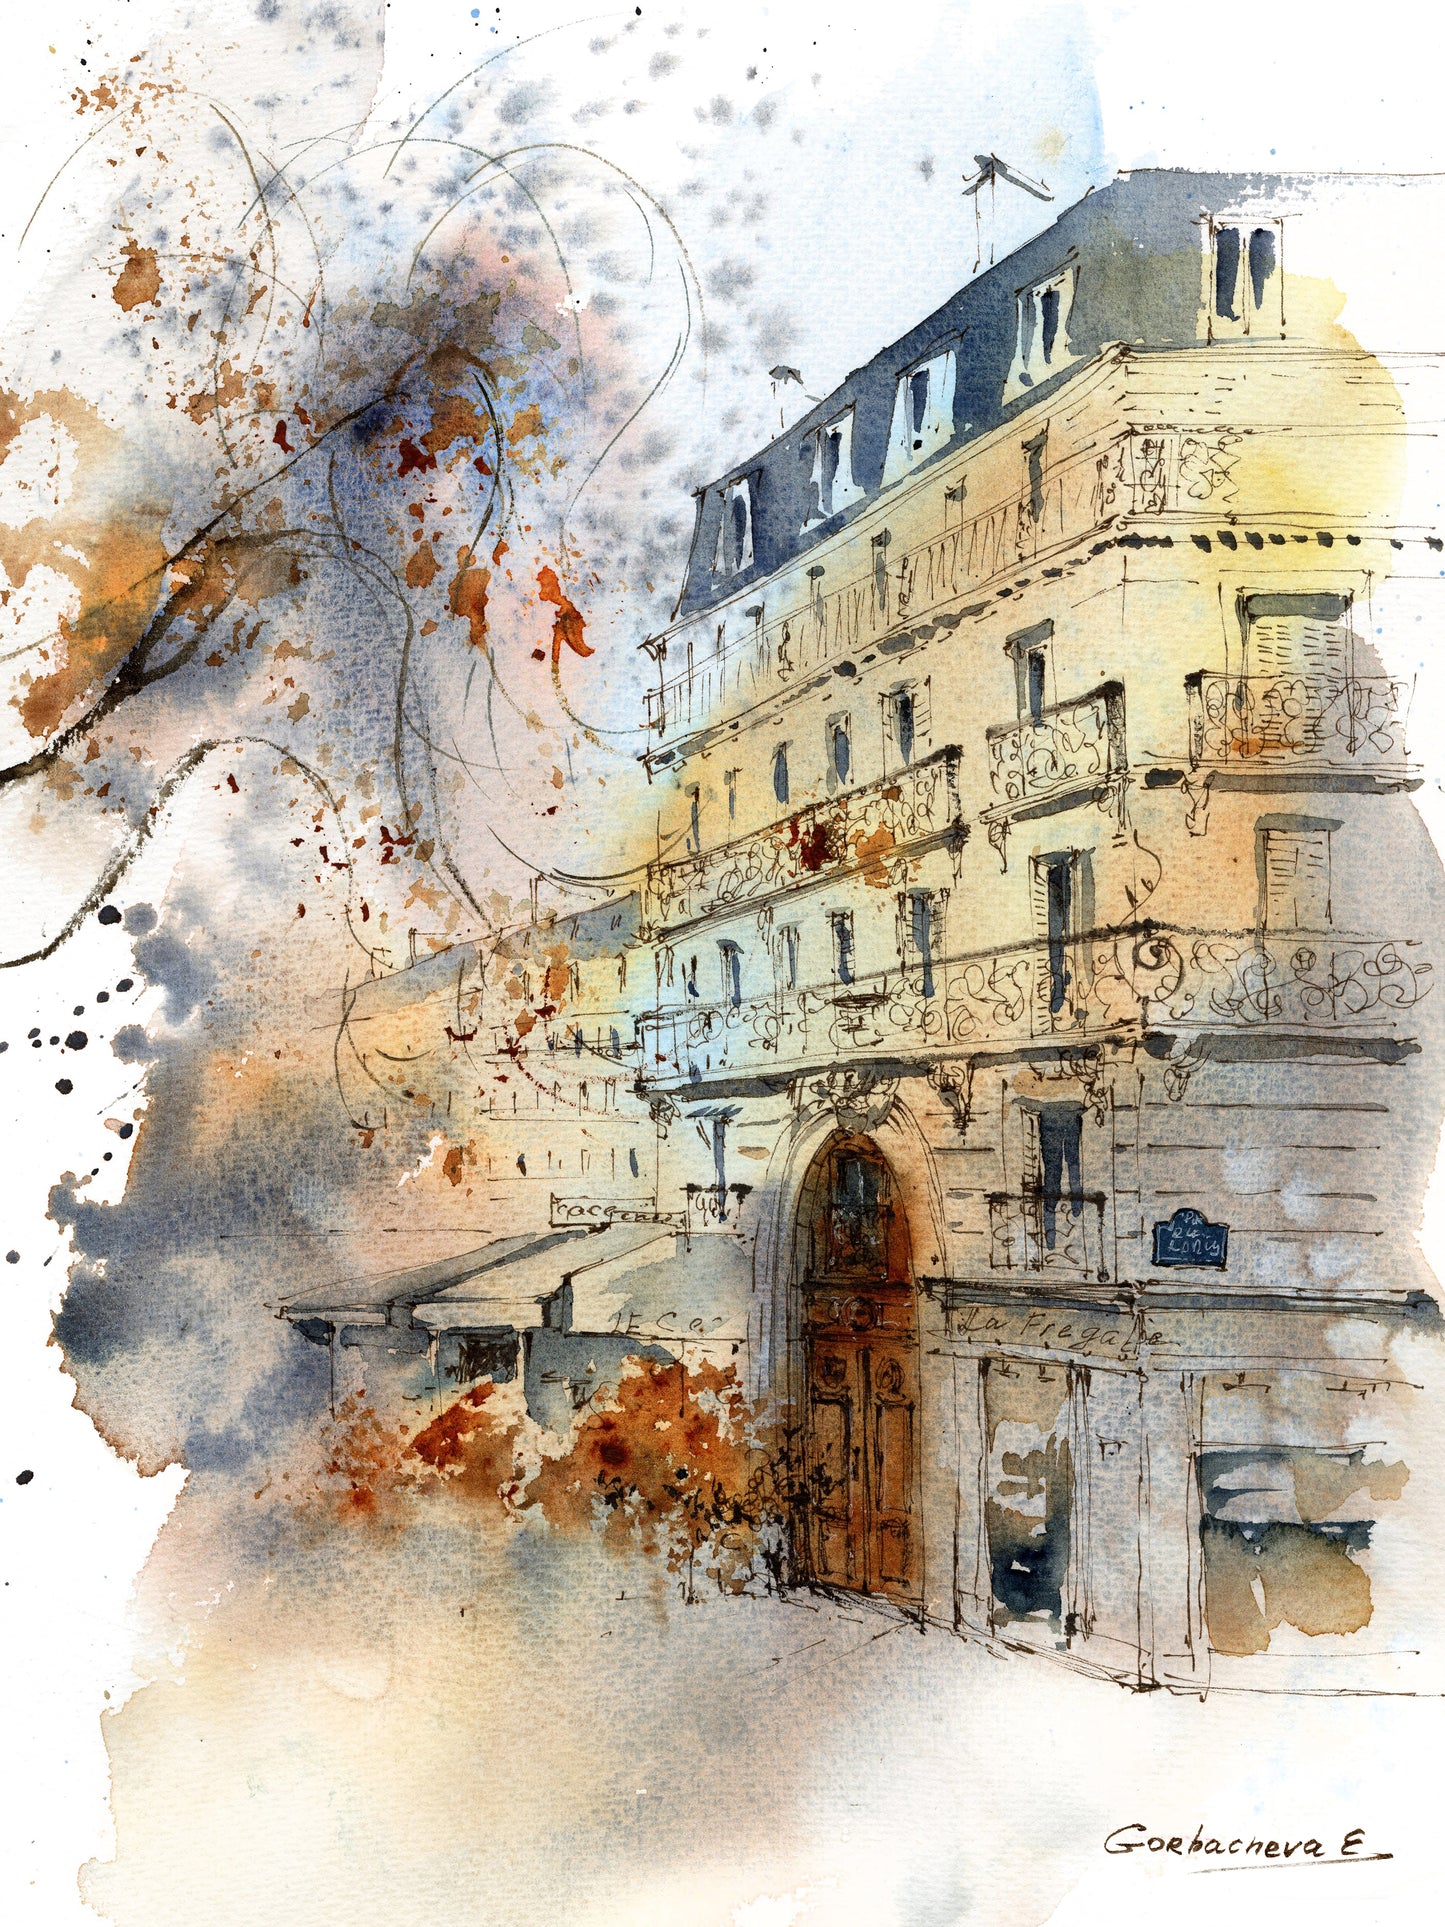 Autumn in Paris: Charming Street Art Prints from Watercolor Painting